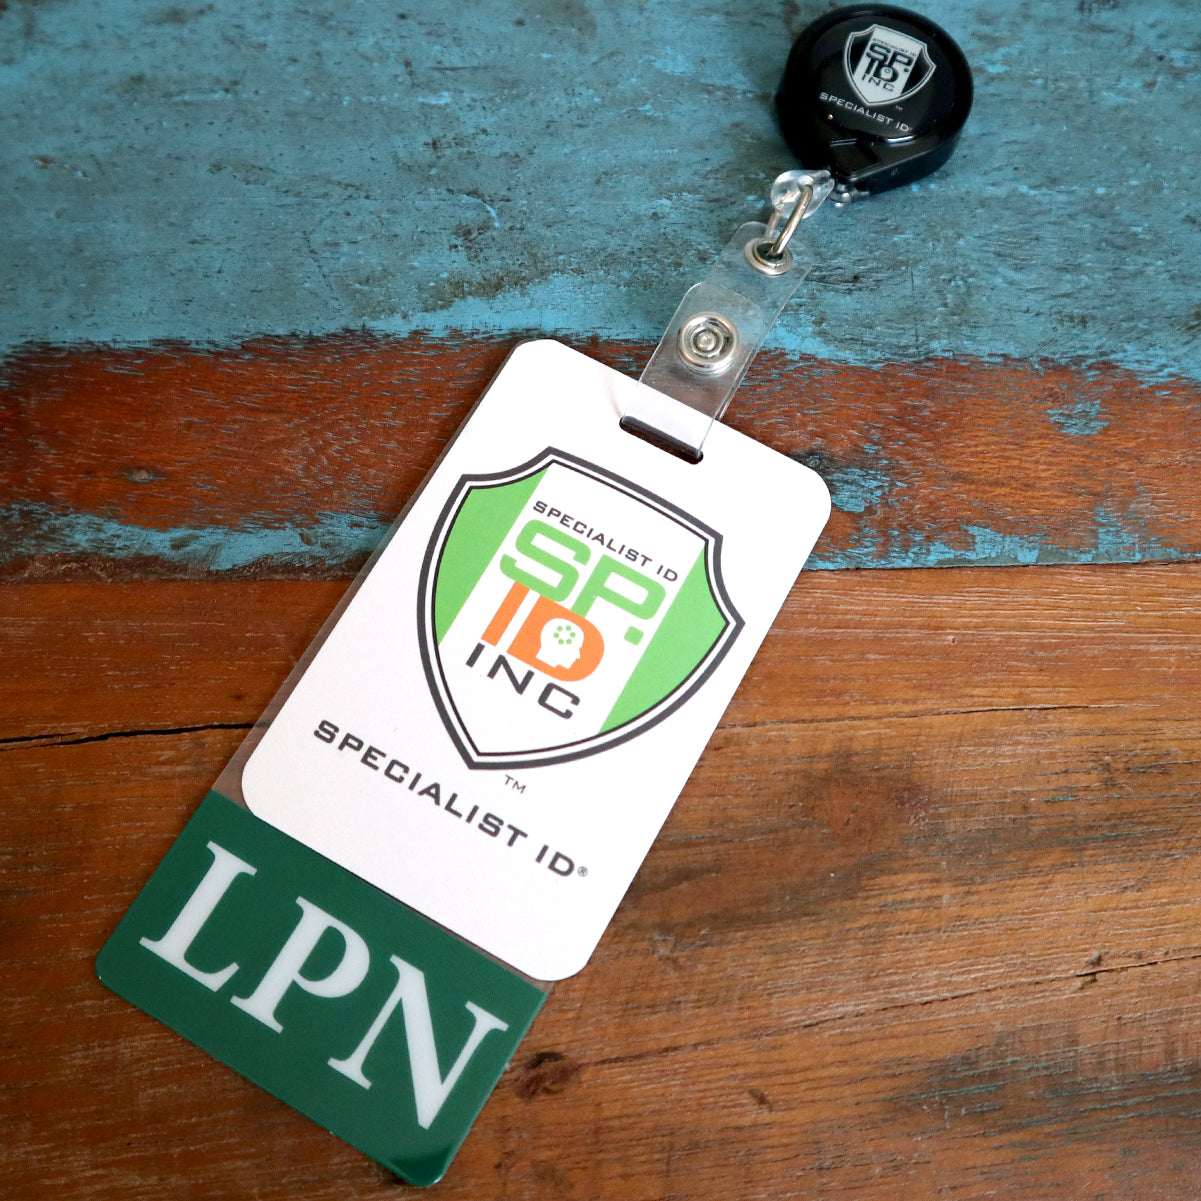 An LPN badge with a "Specialist ID Inc." logo on a retractable badge holder and an additional Clear LPN Badge Buddy Vertical with Green Border for Licensed Practical Nurses rests on a wooden surface.